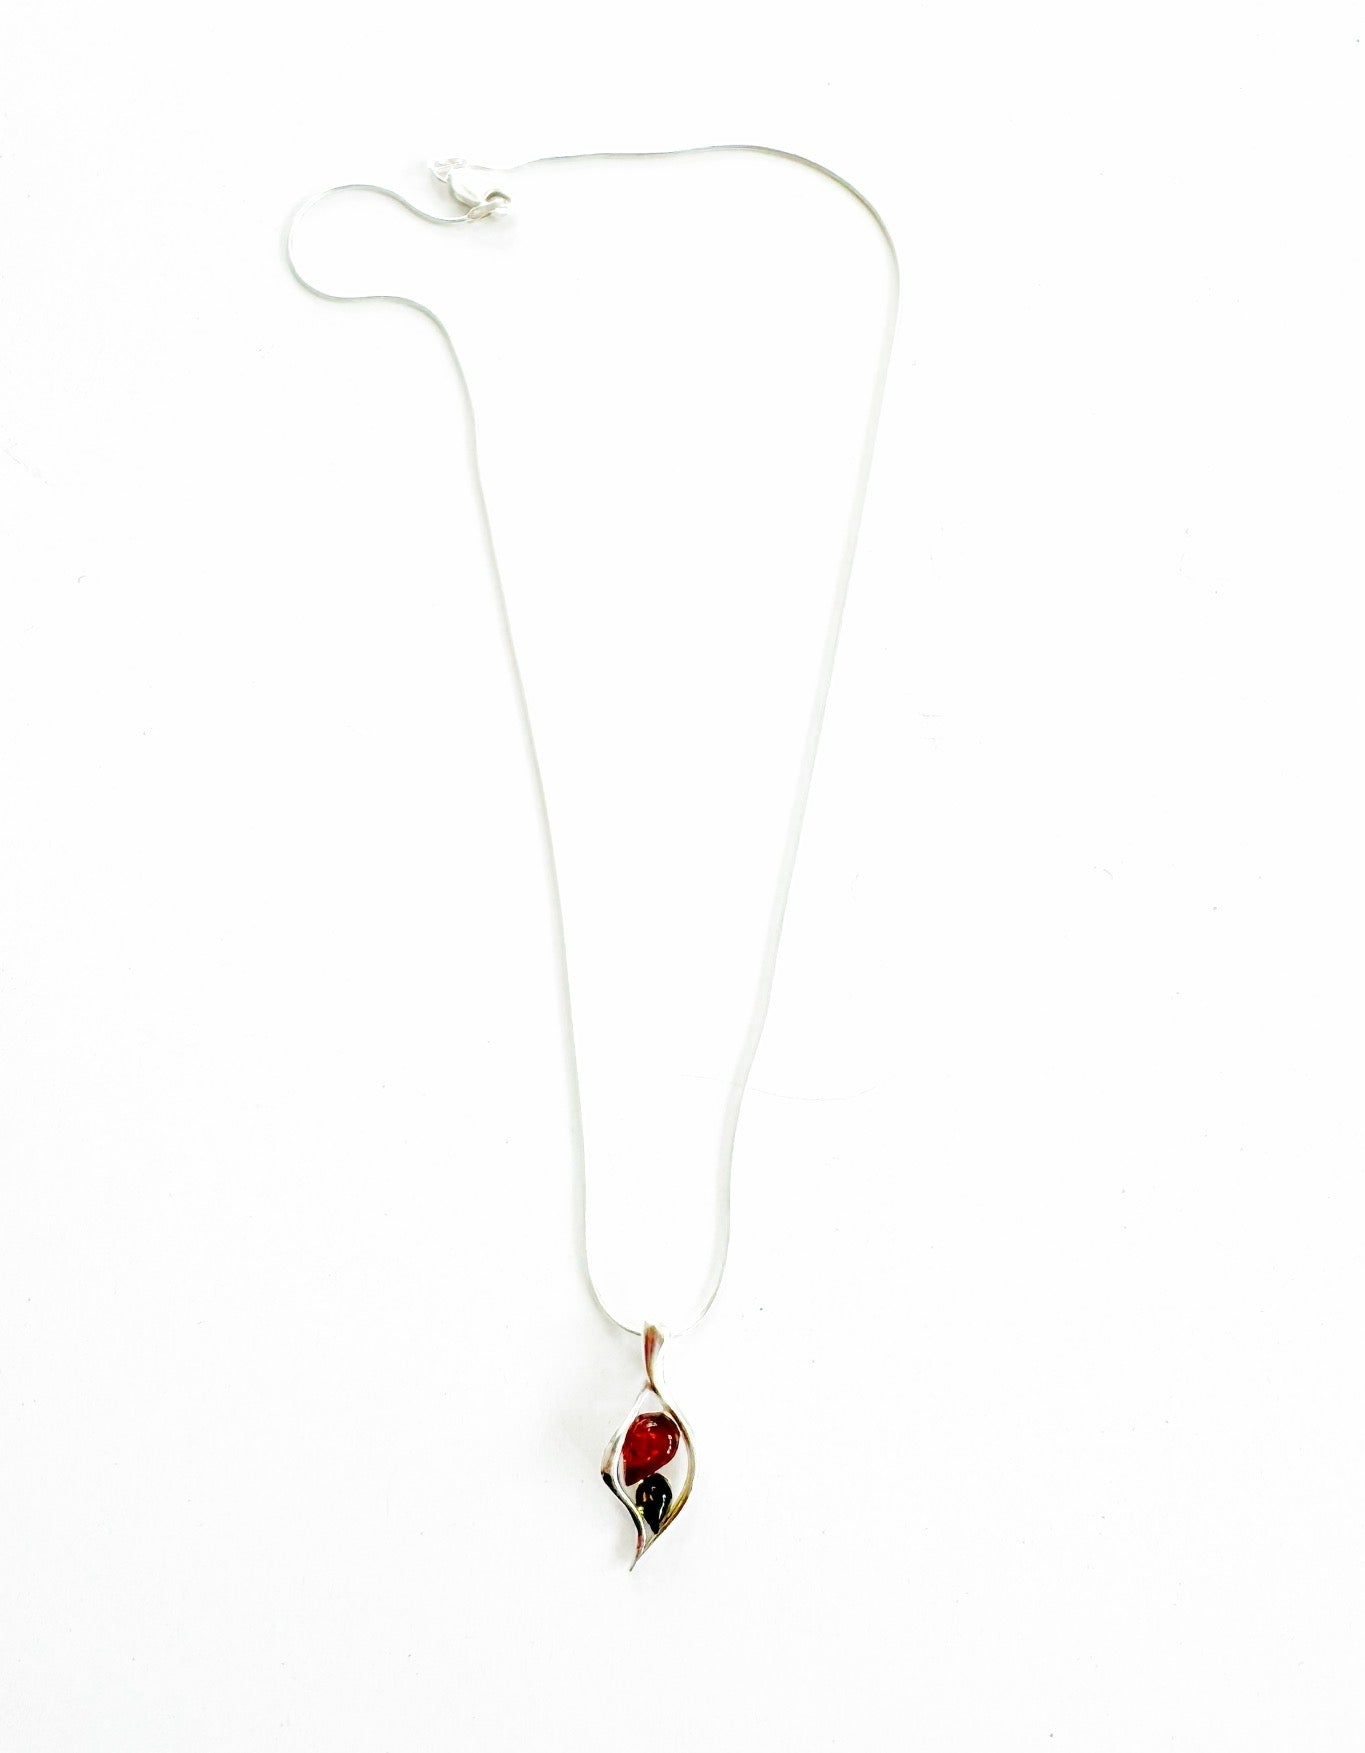 Necklace - Amber & Silver